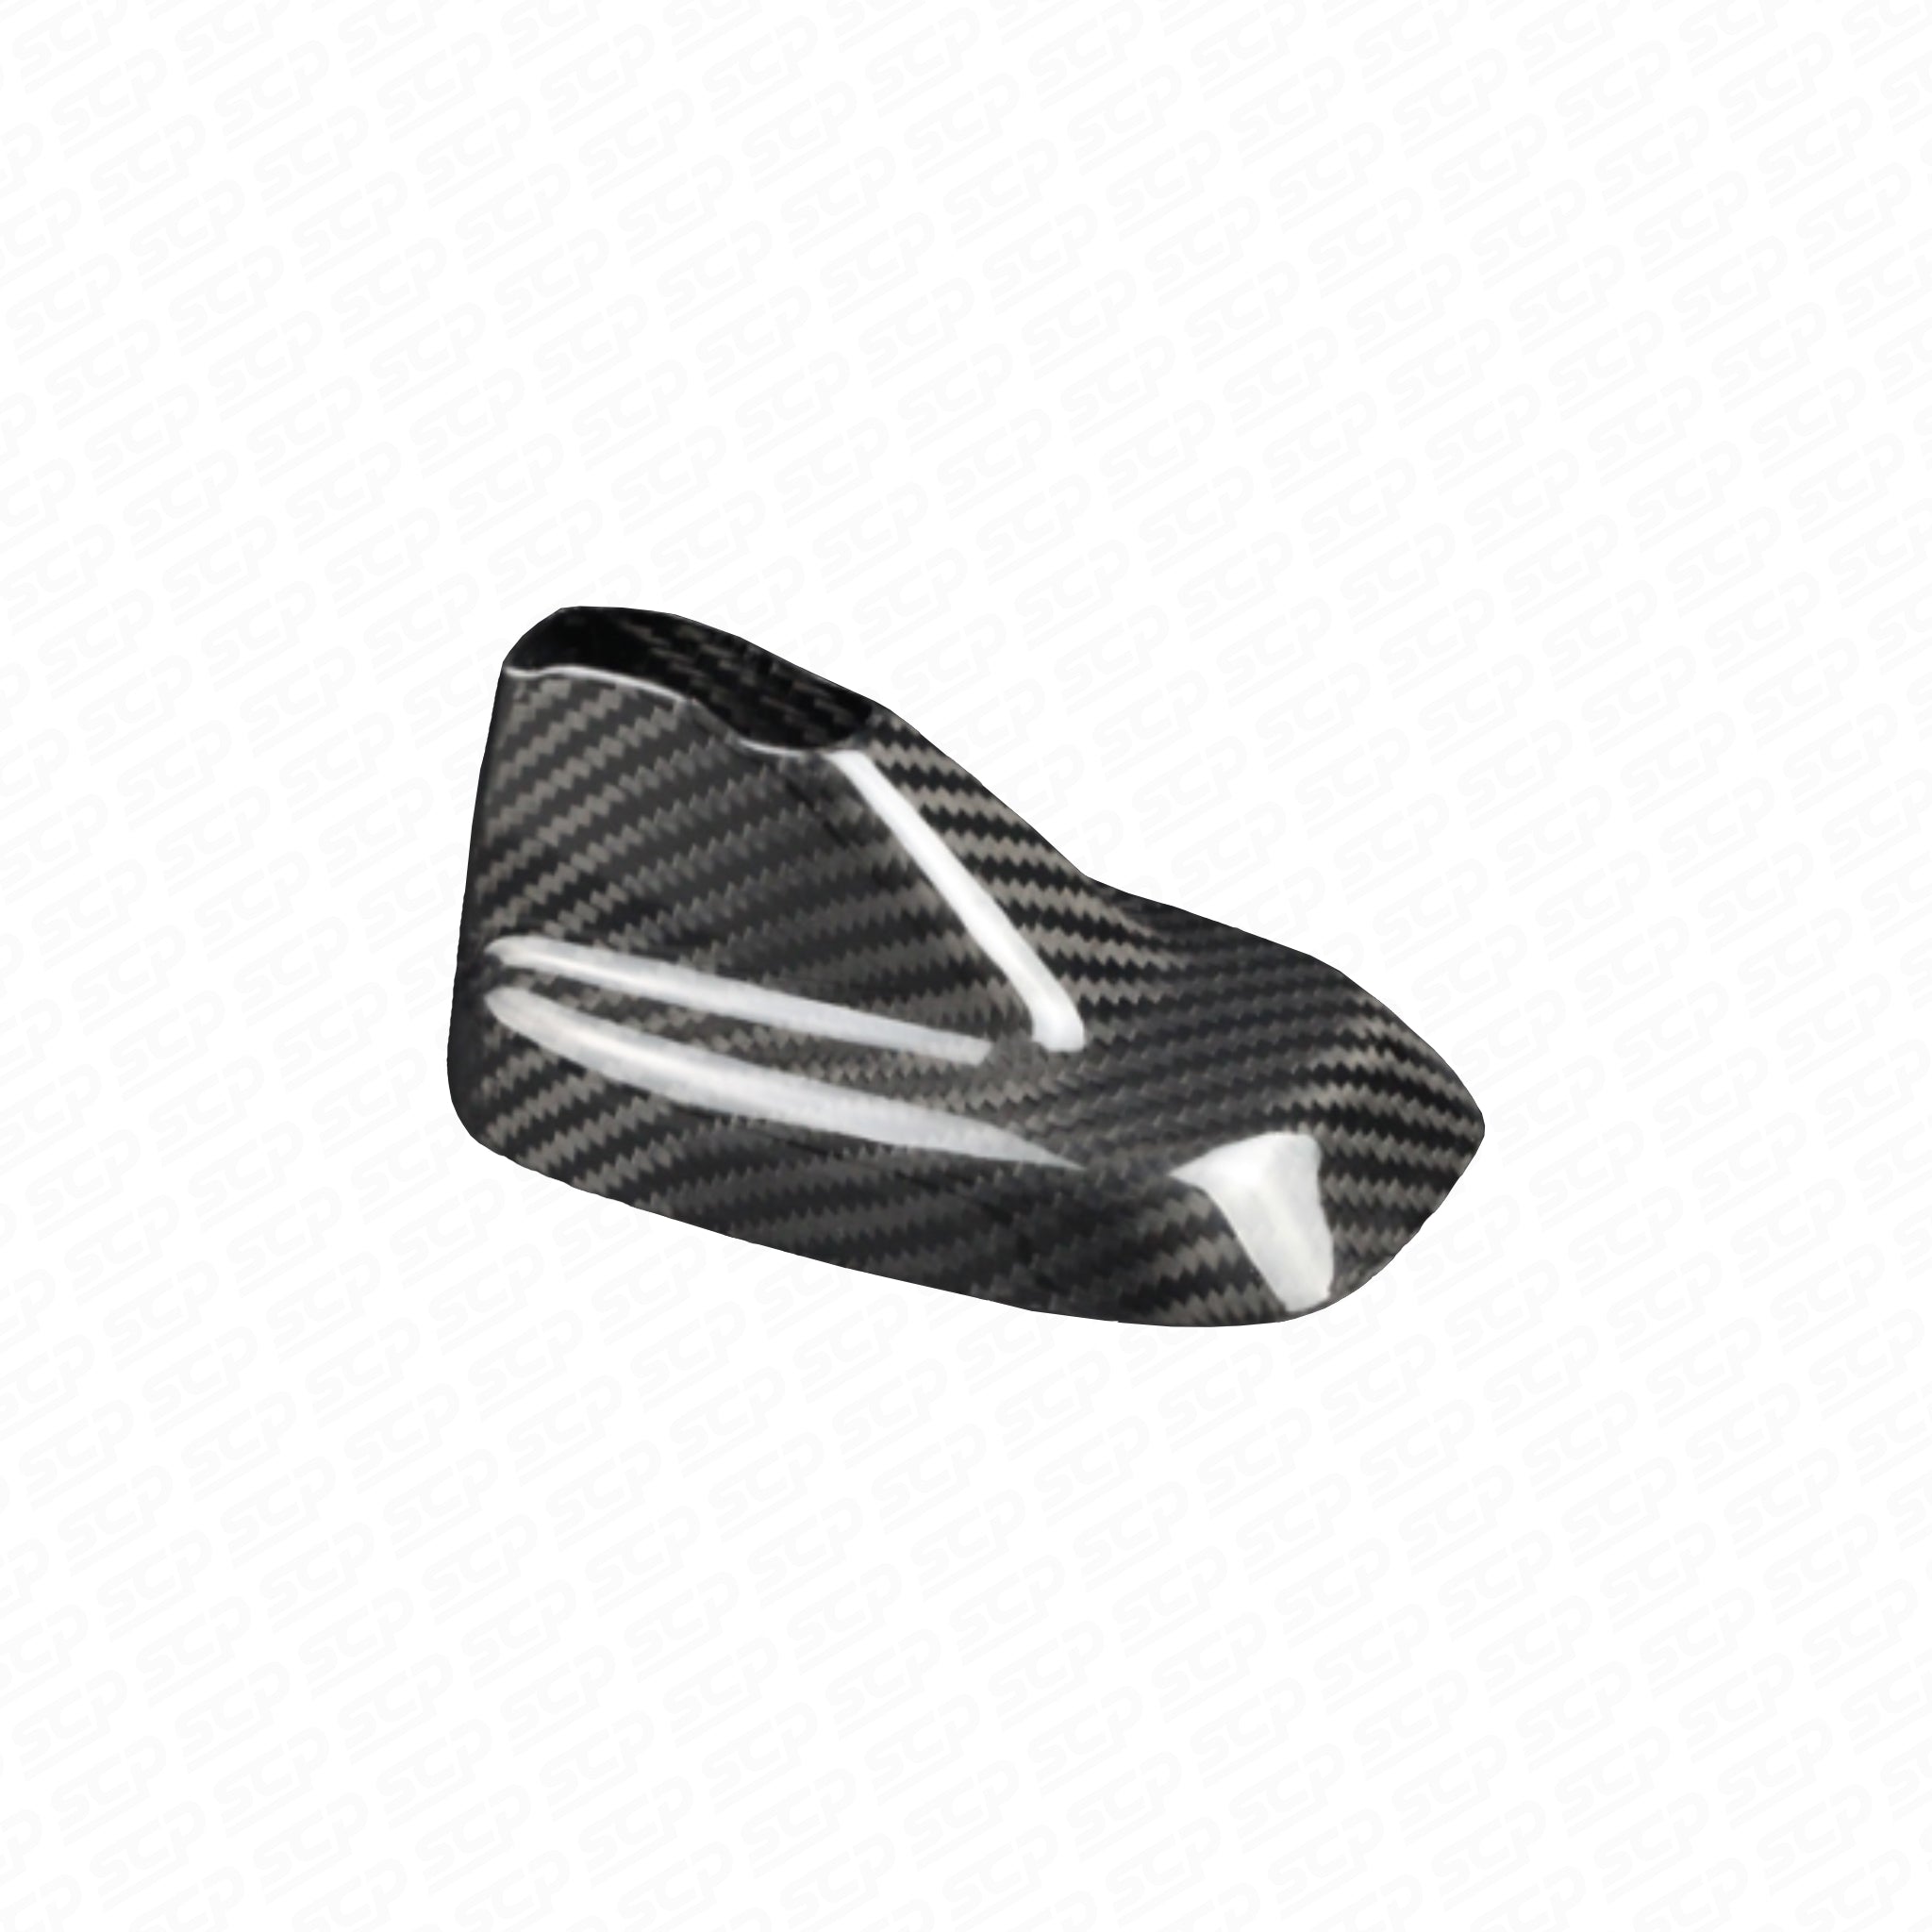 MINI F-Series Aerial Cover for F54 Clubman and F60 Countryman